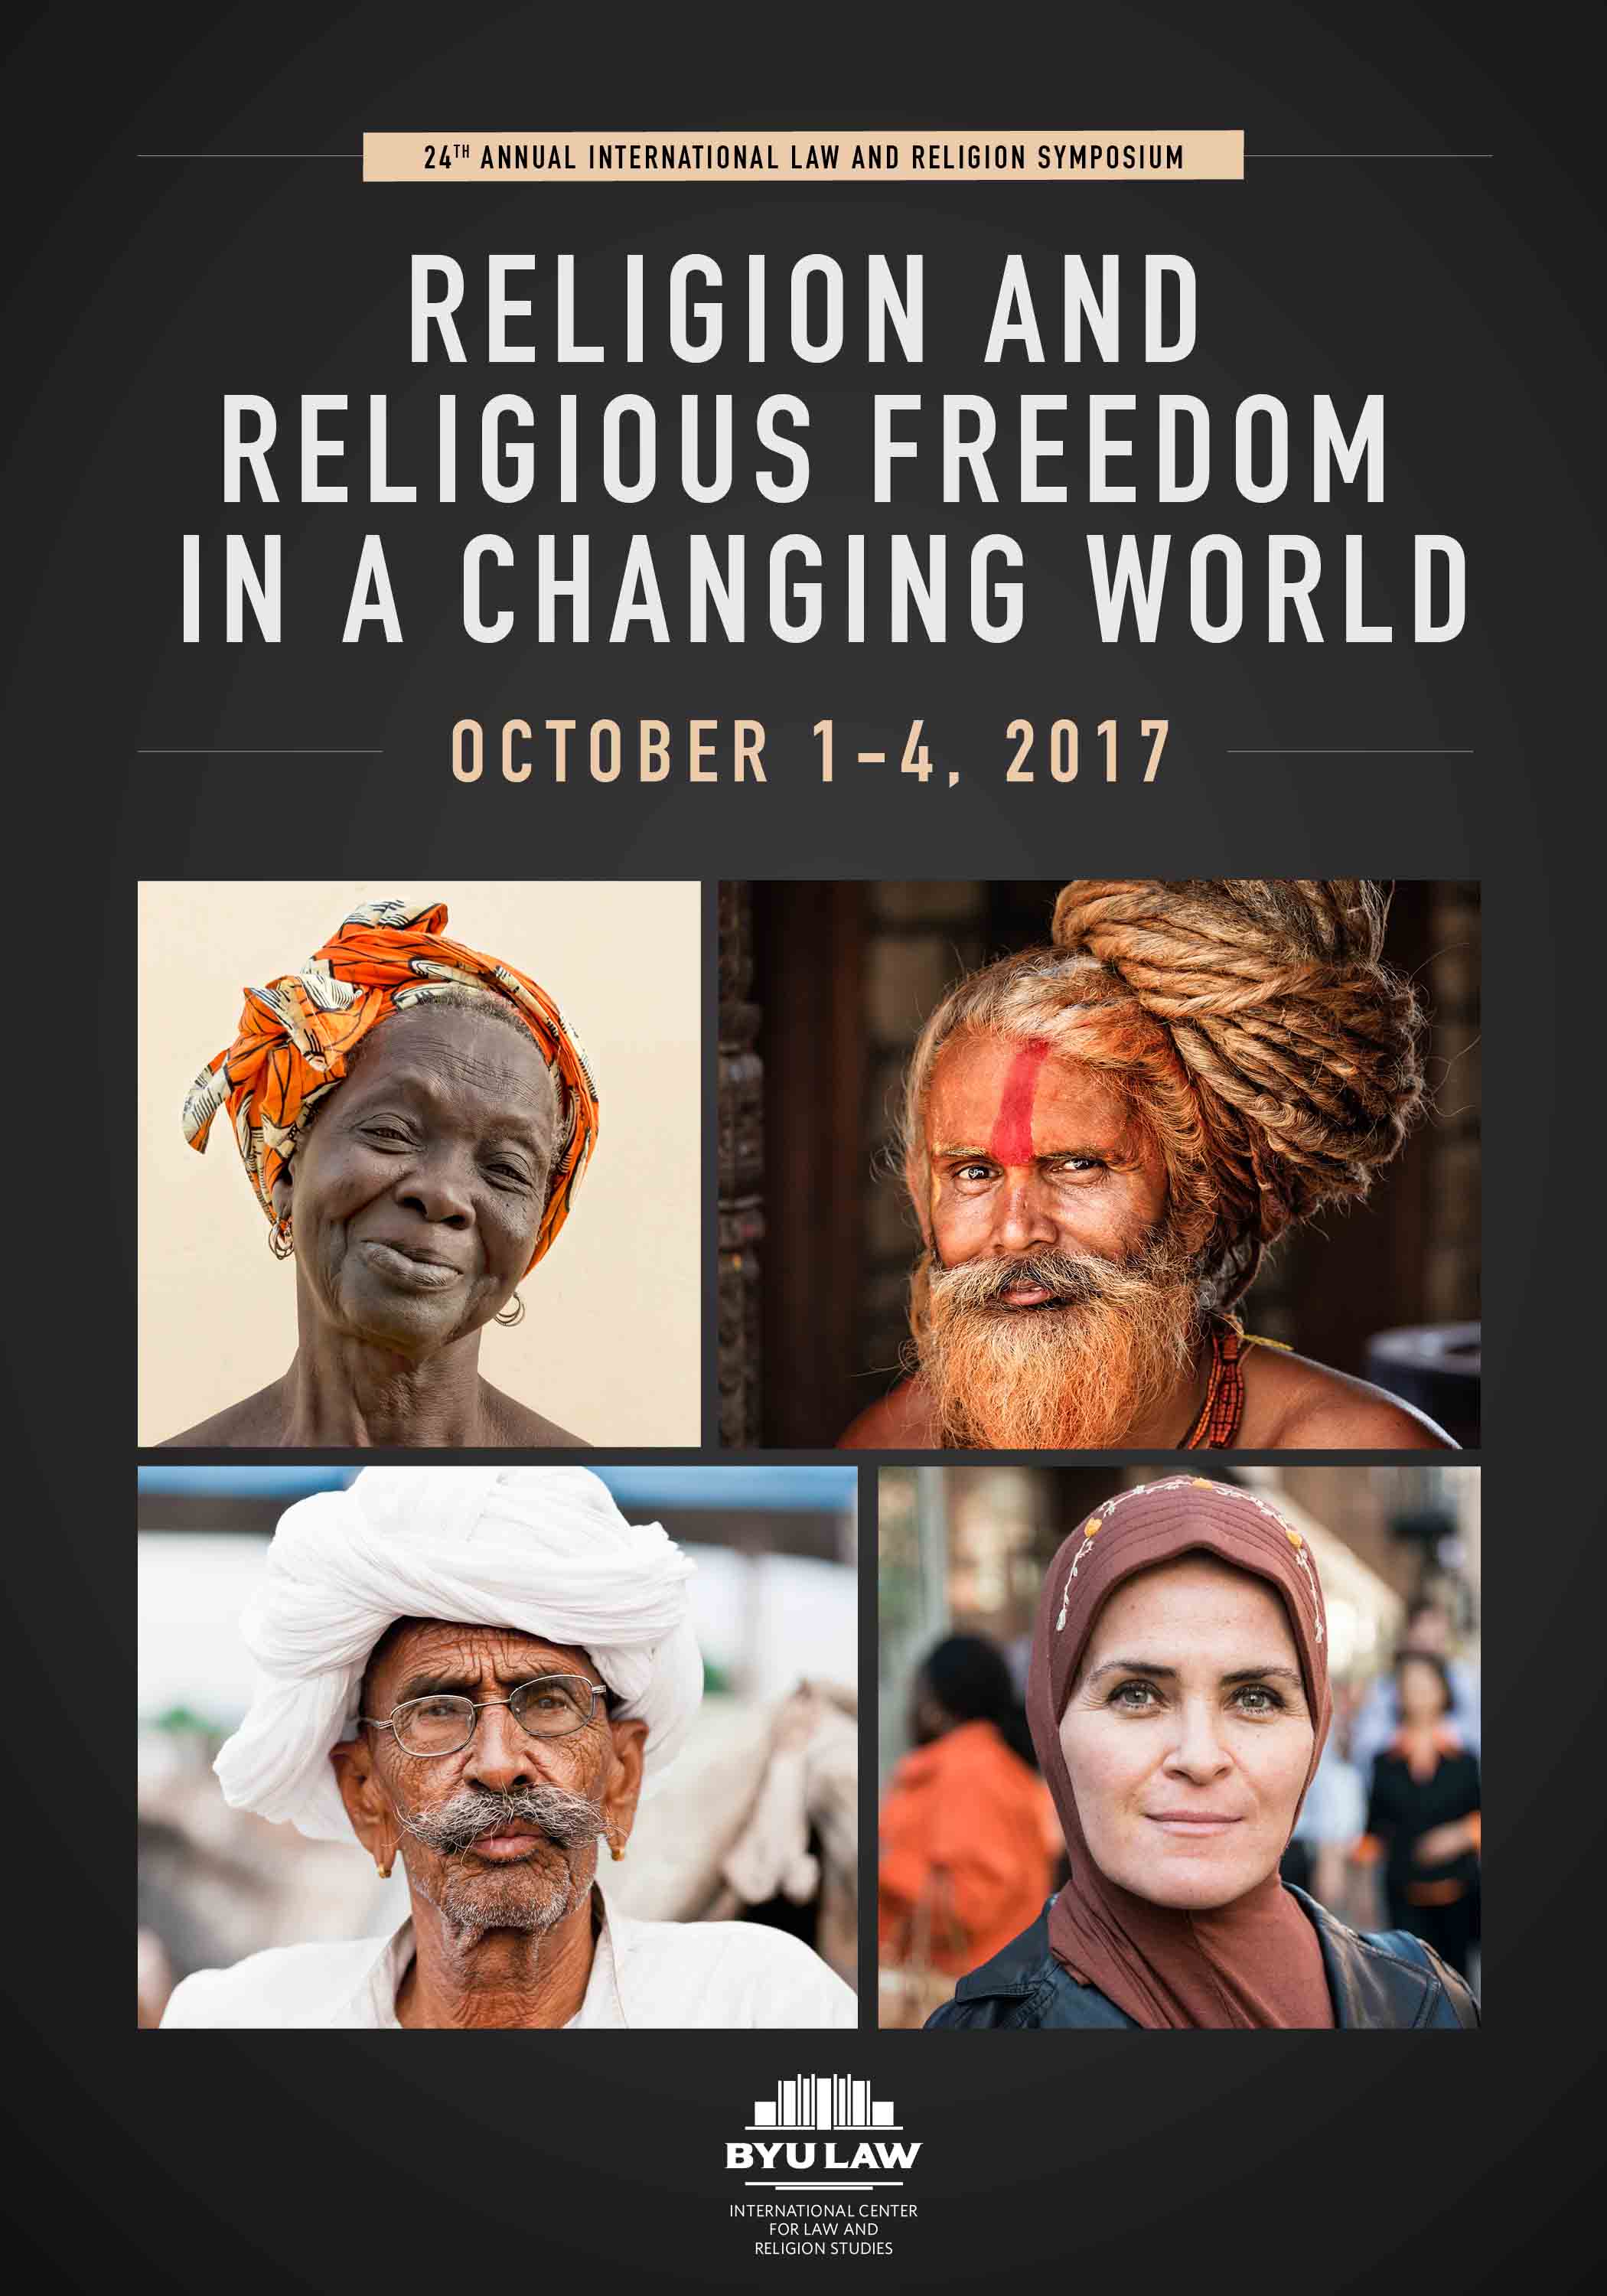 Image for Symposium 2017: 'Religion and Religious Freedom in a Changing World'